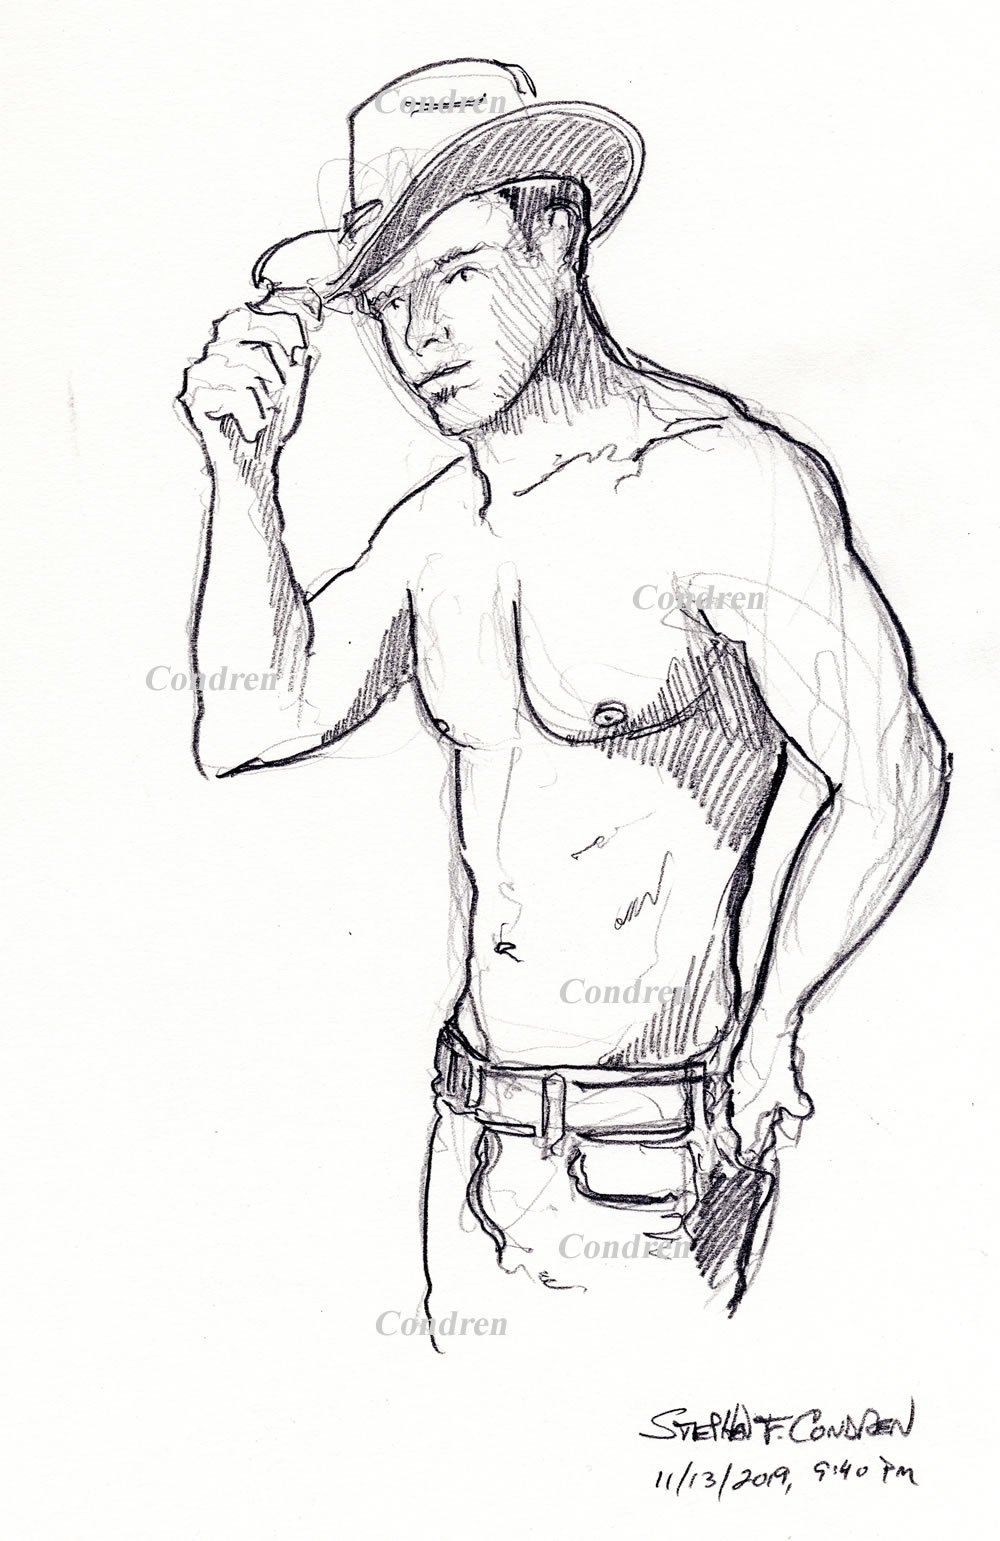 Hot shirtless cowboy #348Z male pencil figure drawing by artist Stephen F. Condren, with LGBTQ endorsed gay prints, and scans.